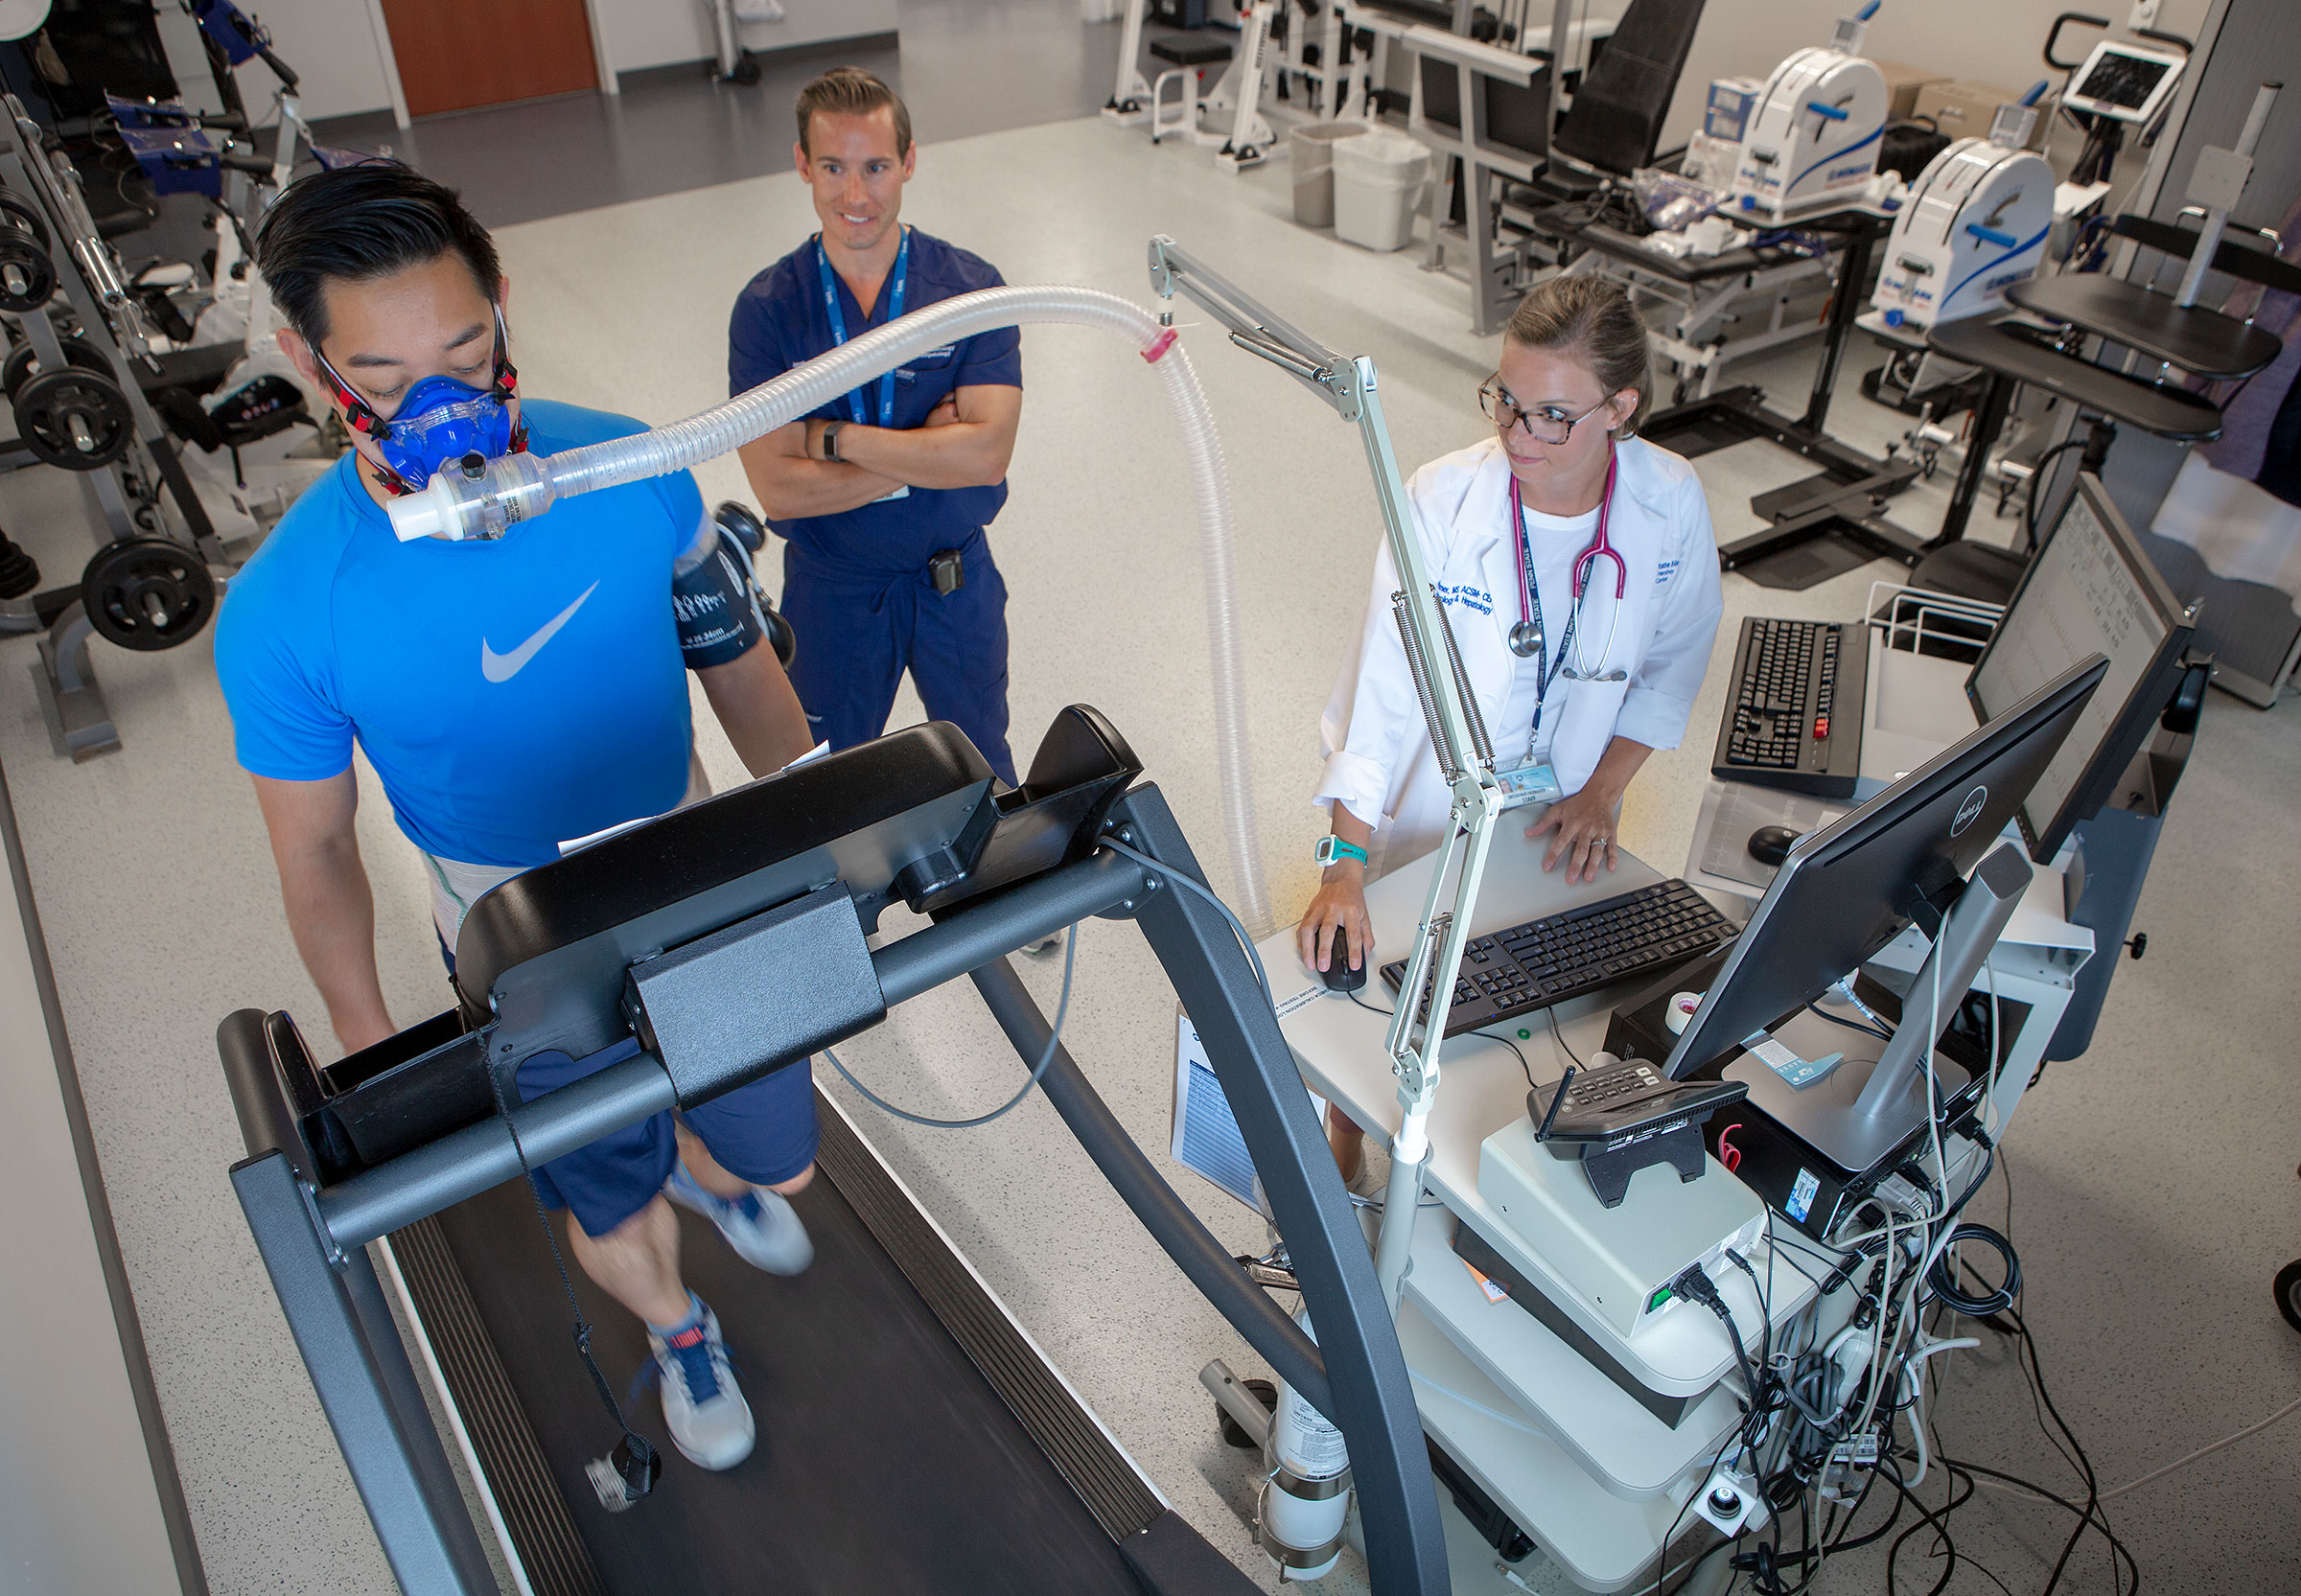 A patient walks on a treadmill wearing a face mask in the lab of Dr. Jonathan Stine at Penn State Health Milton S. Hershey Medical Center. Dr. Stine and exercise physiologist Brei Hummer are watching the patient.